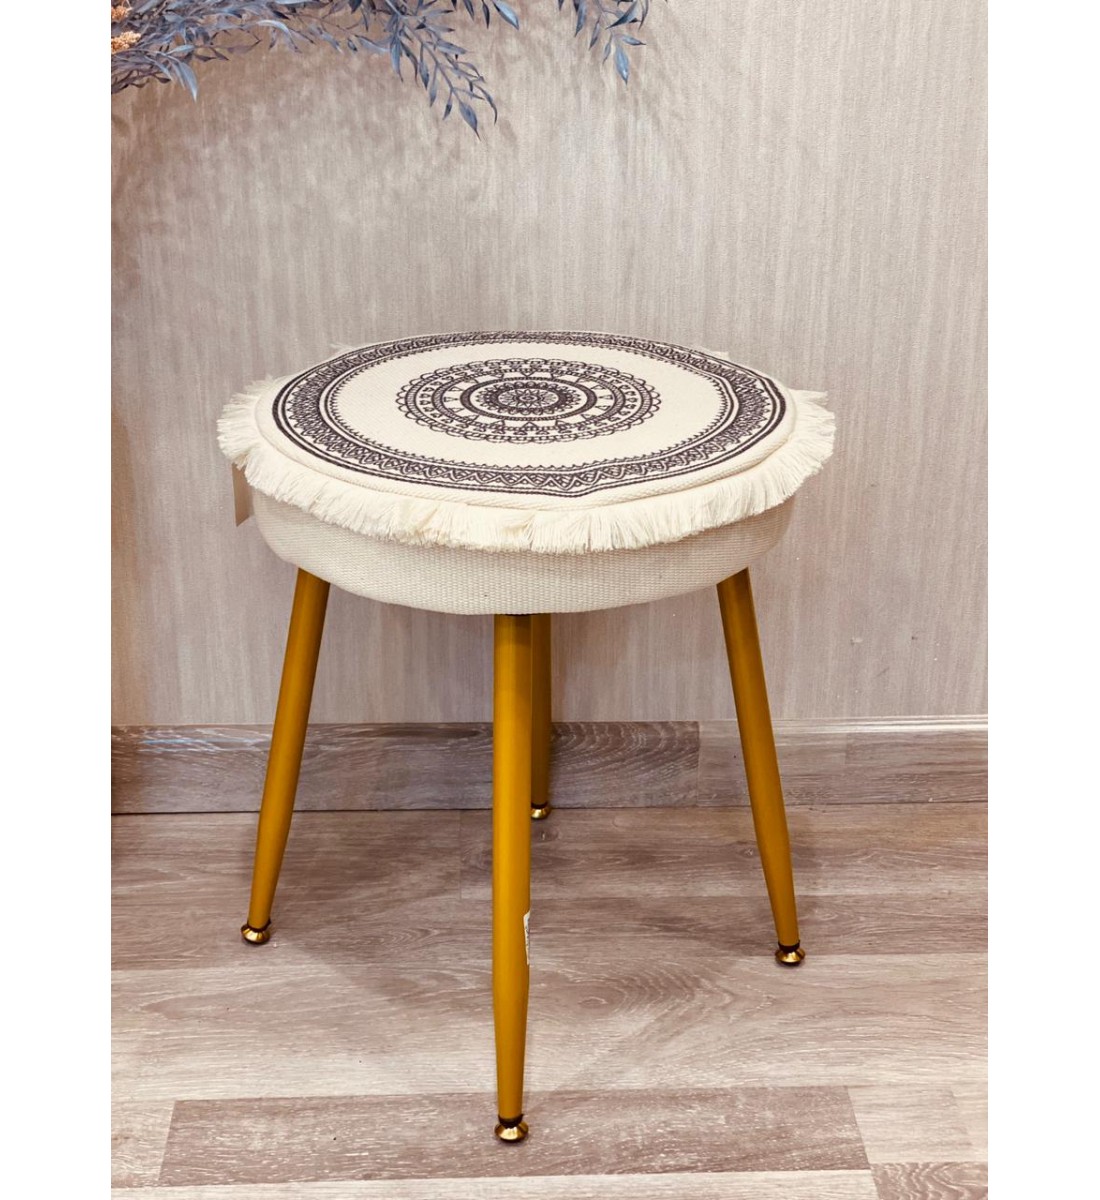 Fabric round chair with iron legs 40 * 45 cm